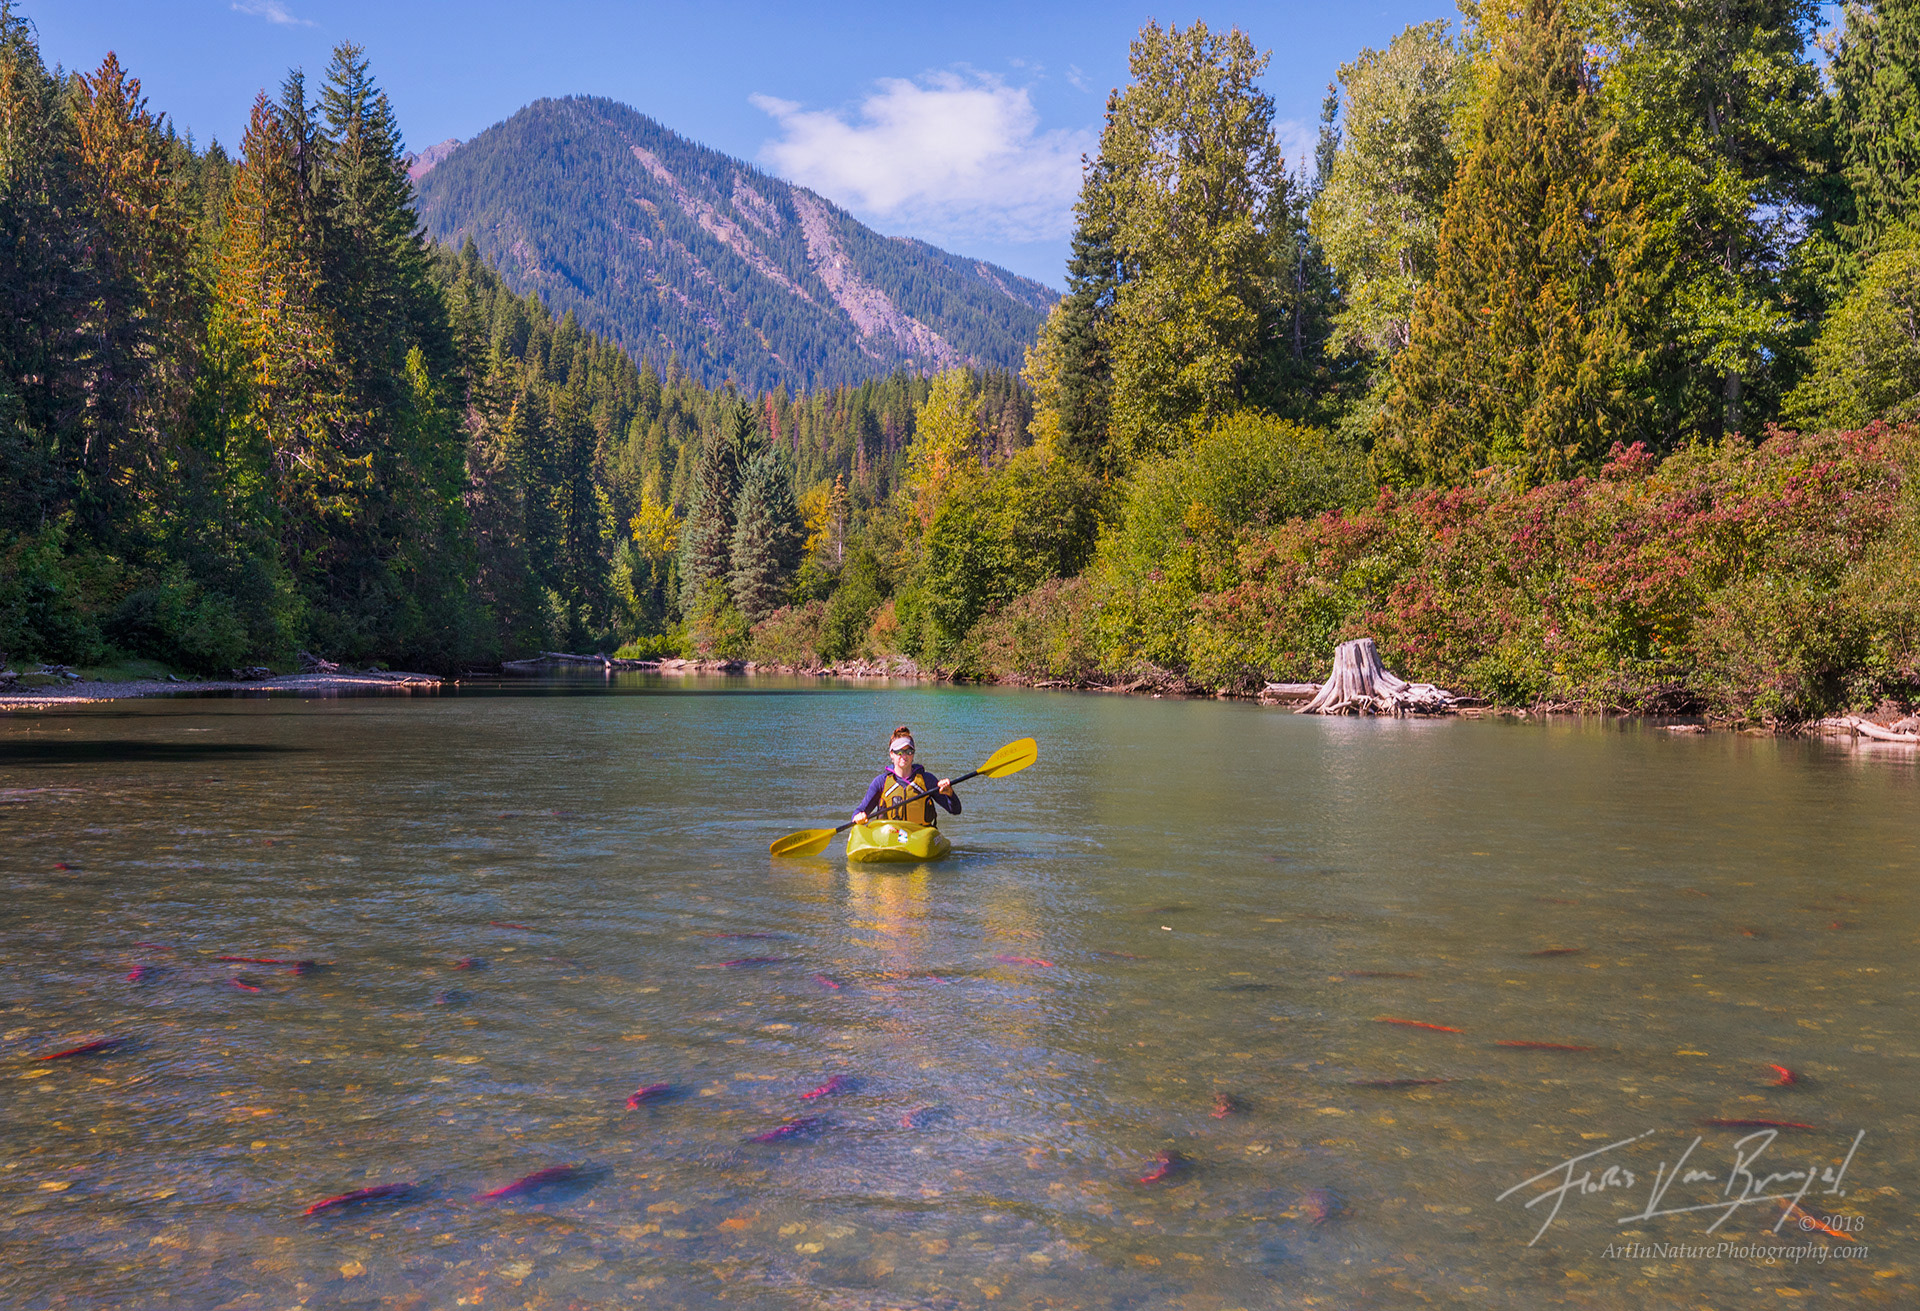 Aubrey paddles down the White River, past a group of spawning Sockeye Salmon.&nbsp;